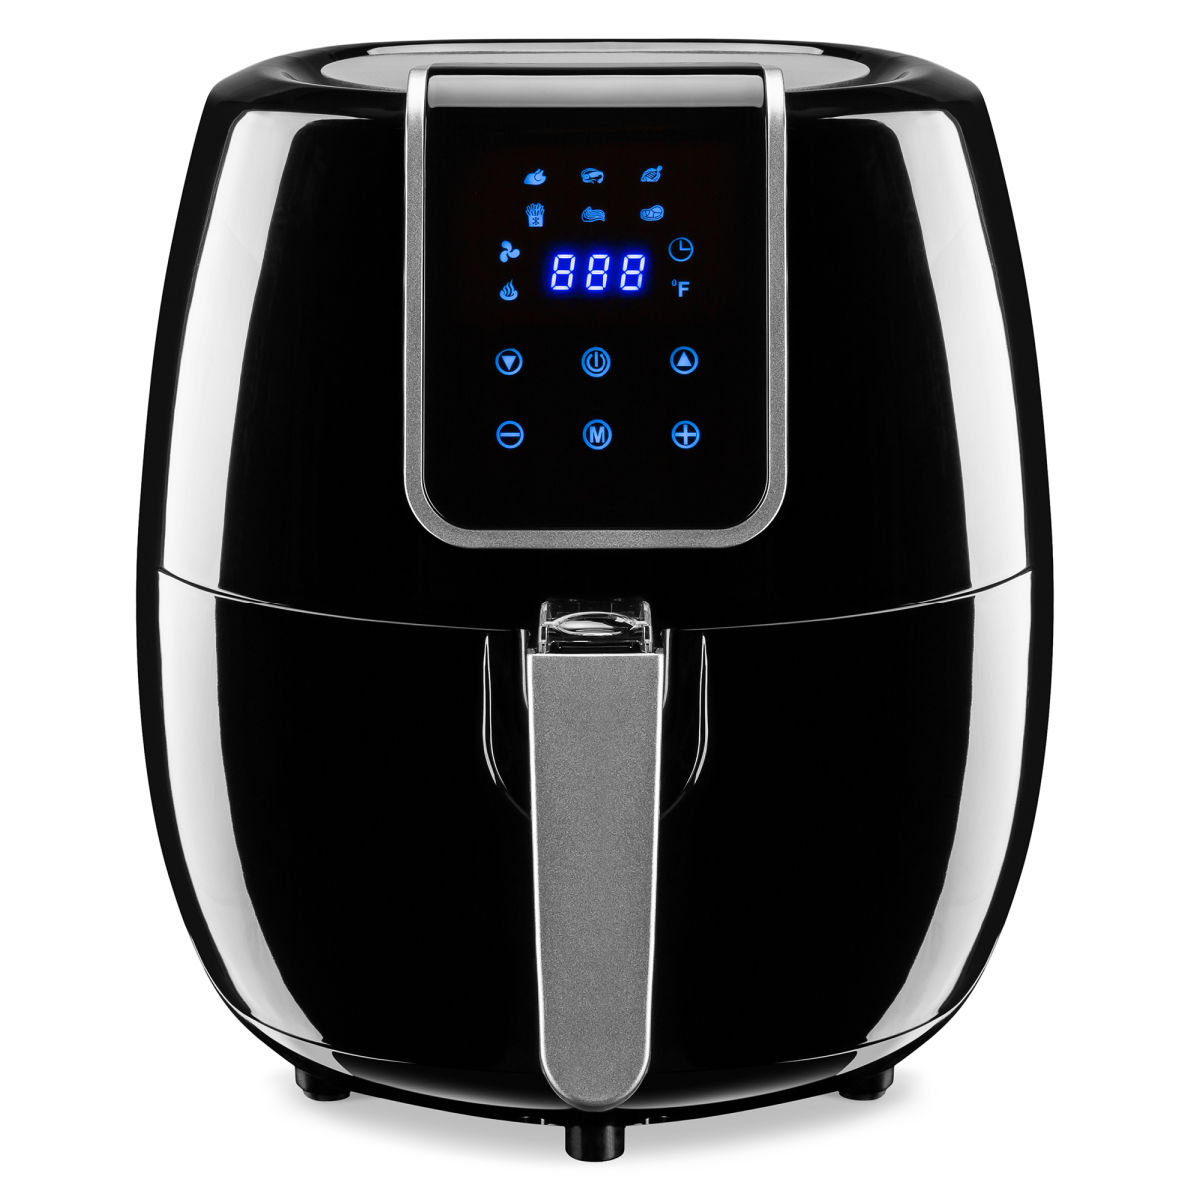 Best Choice Products SKY3775 5.5-Quart 7-in-1 Digital Family Sized Air Fryer